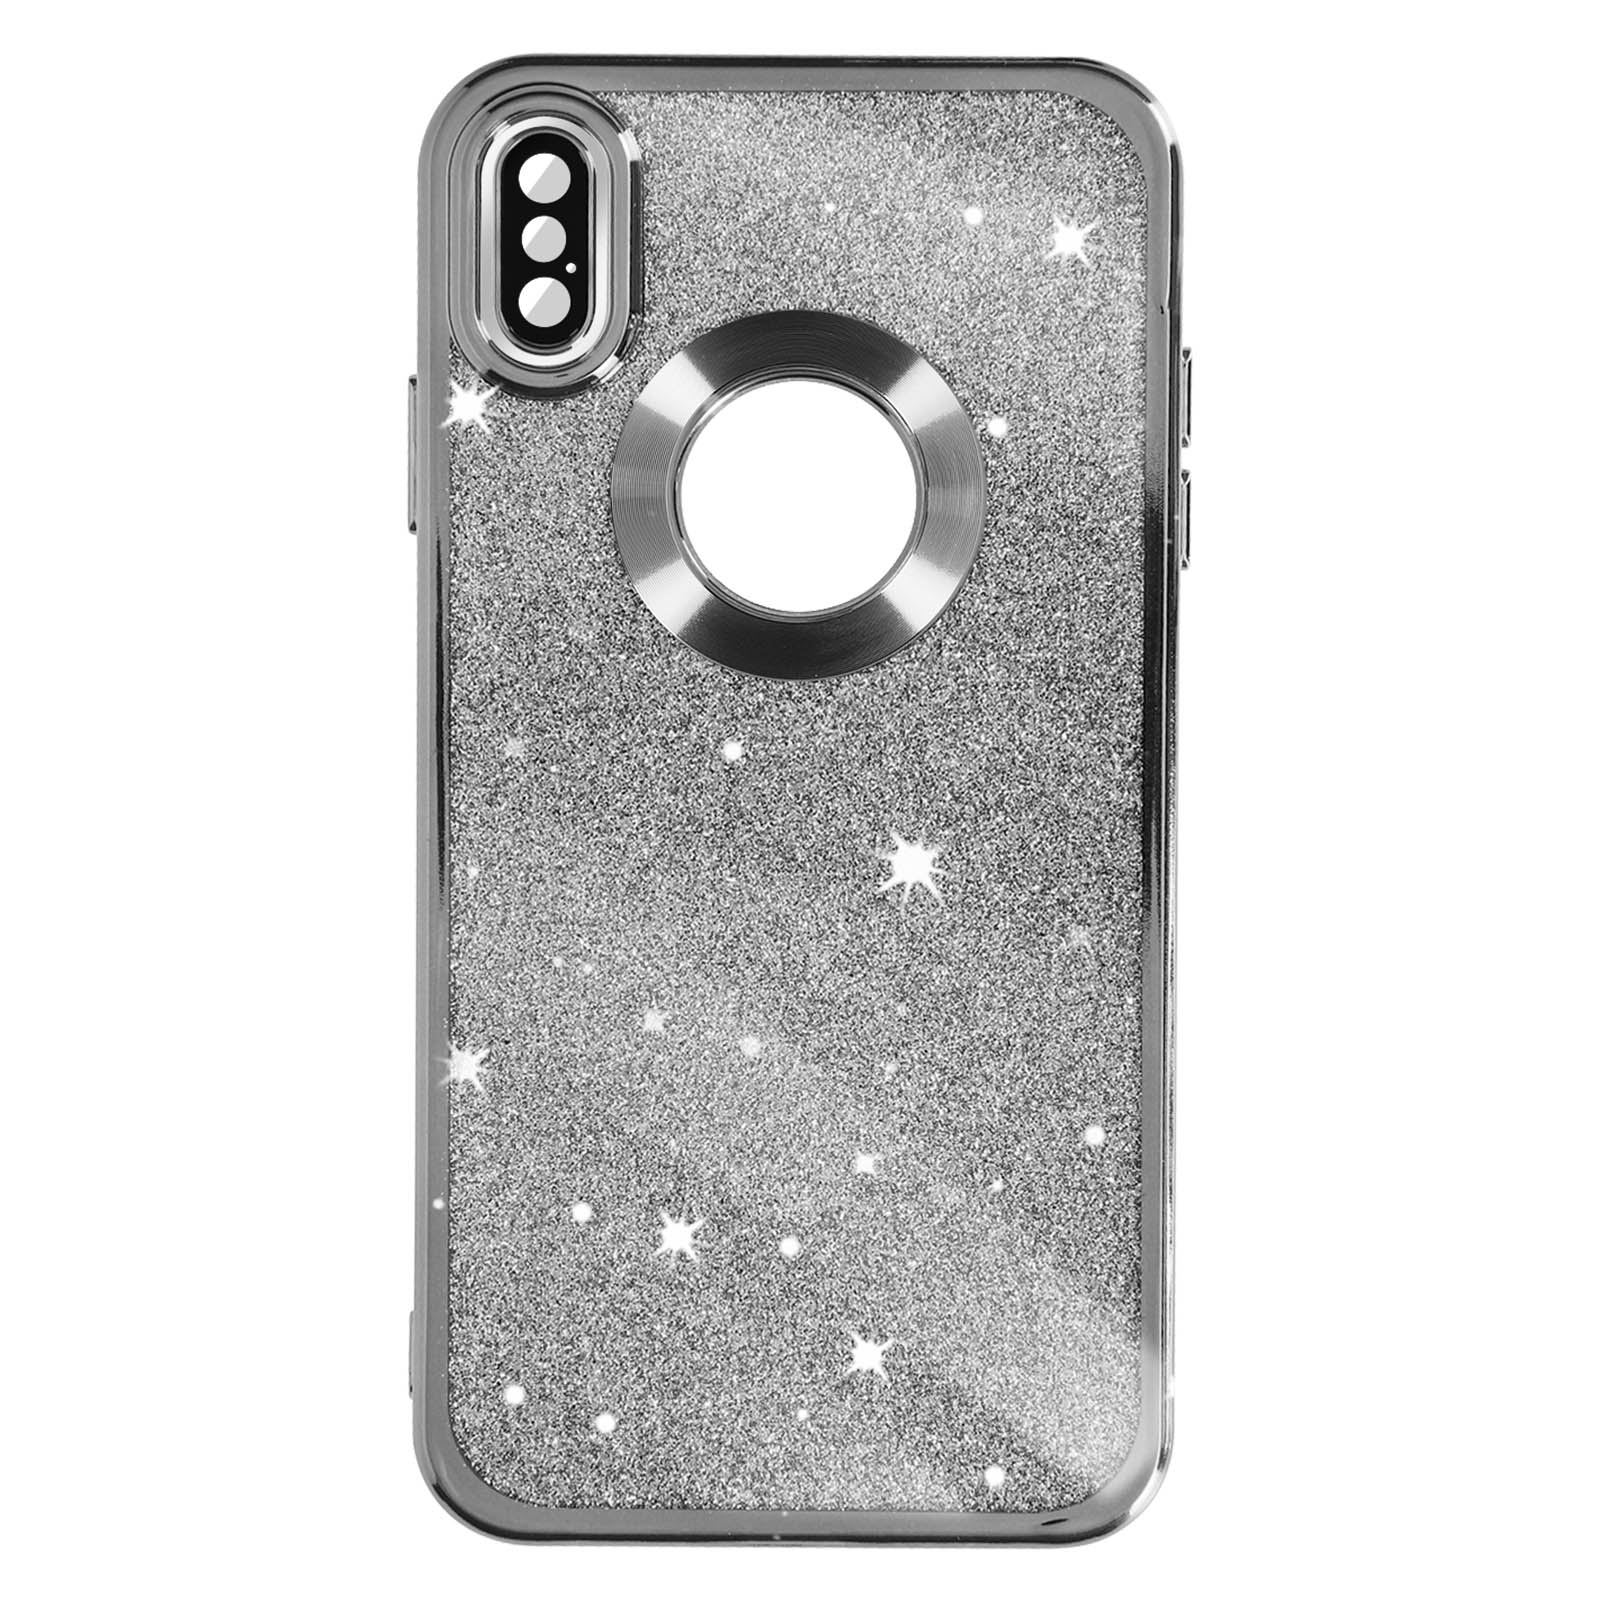 Protecam iPhone Silber Series, XS Apple, Spark AVIZAR Backcover, Max,